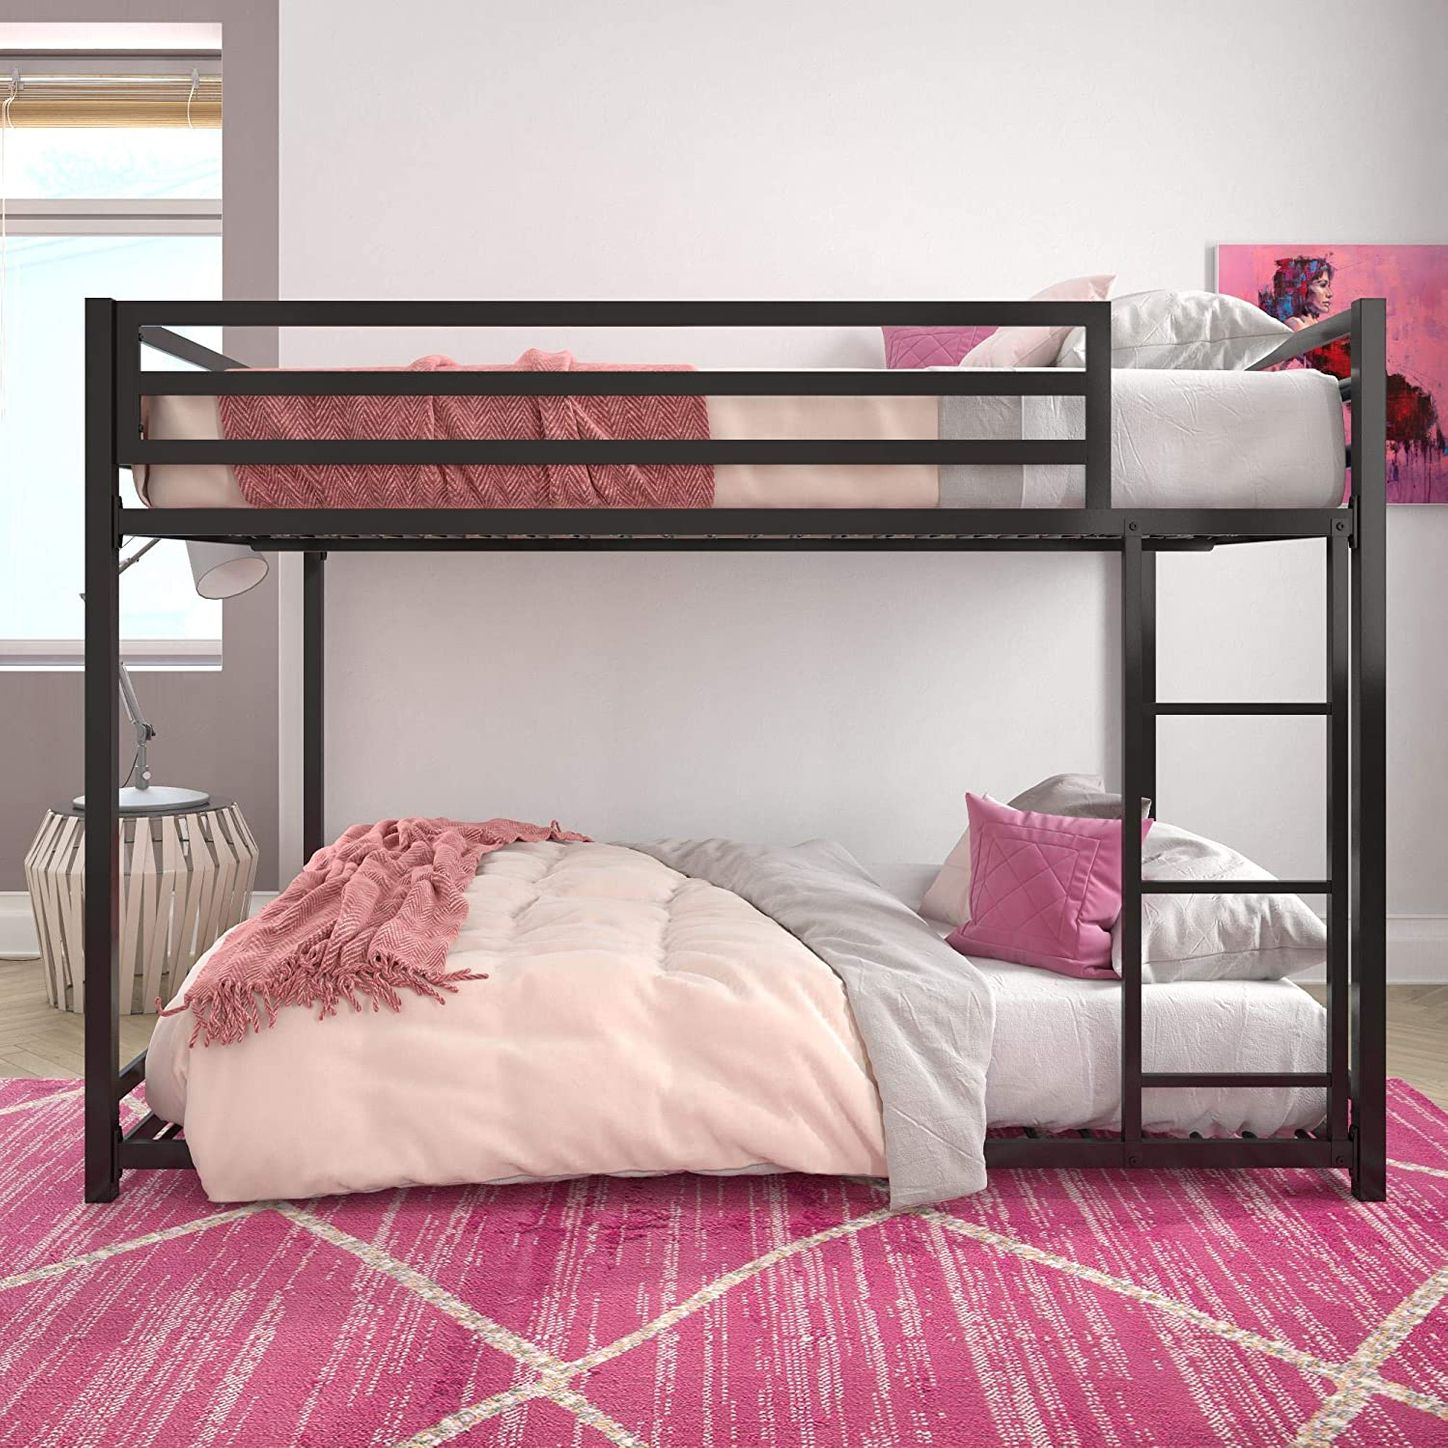 8 Best Bunk Beds 2020 The Strategist, Recommended Age For Bunk Beds